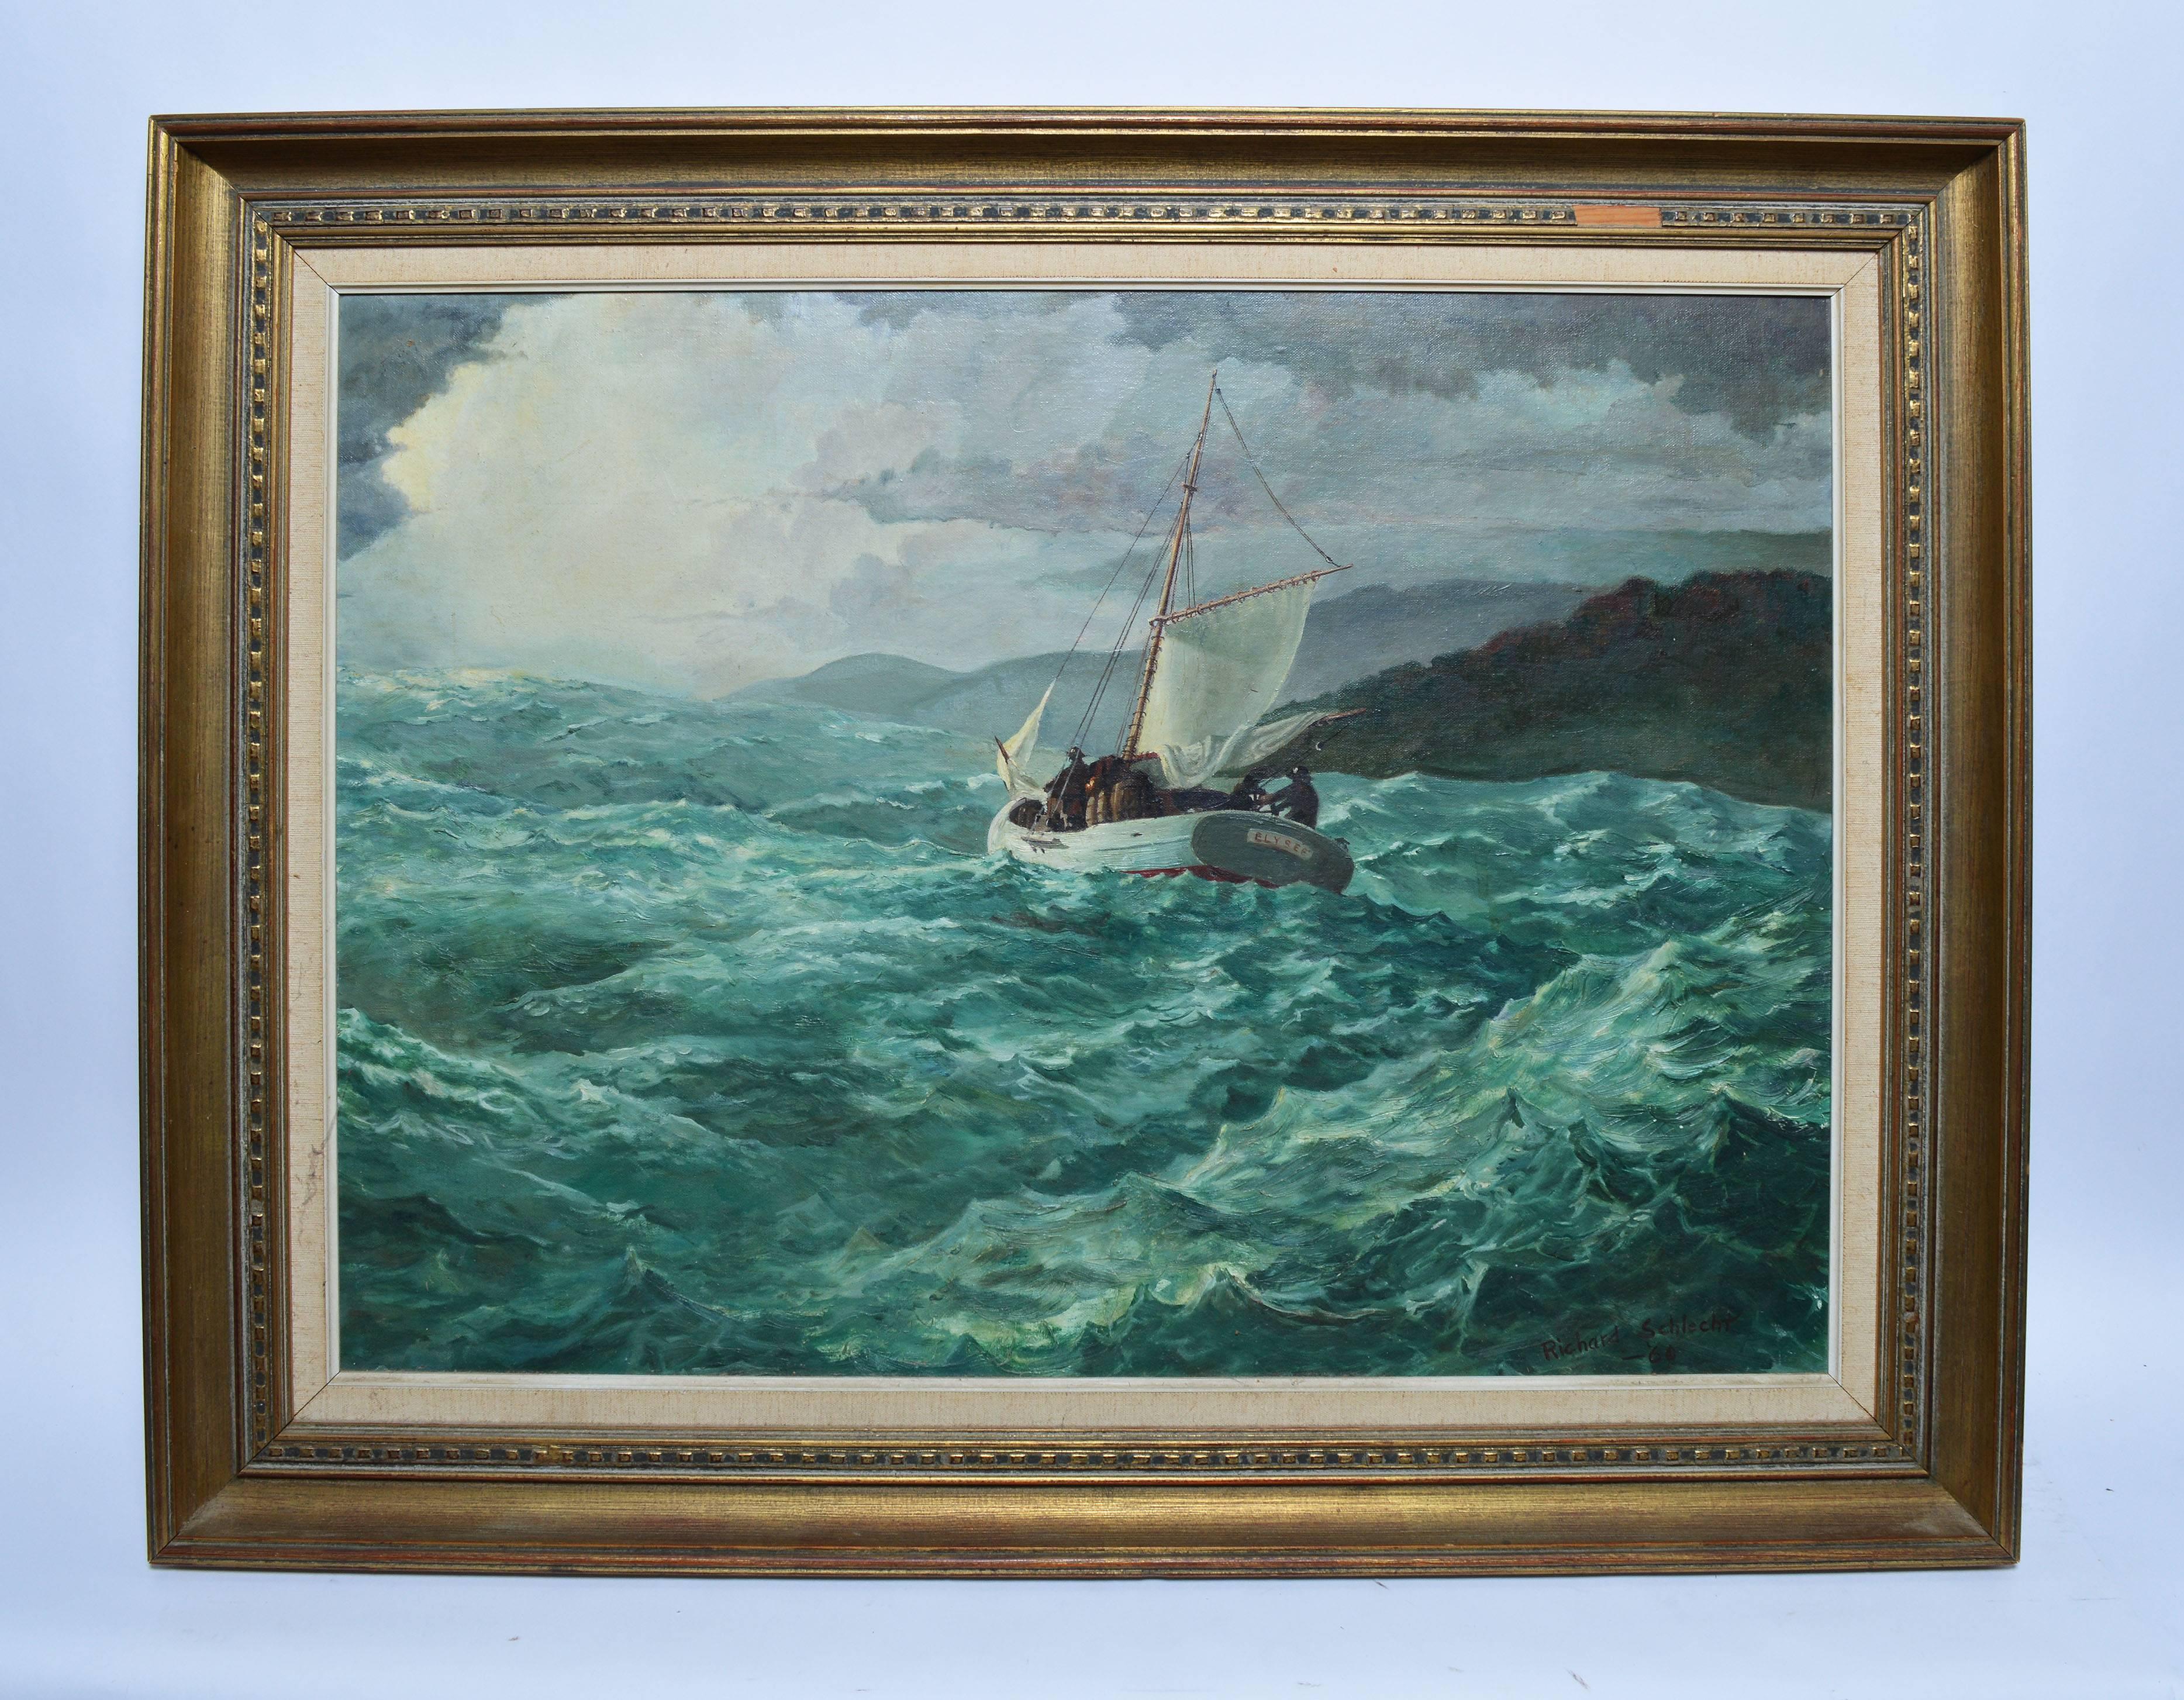 On the Sea - Painting by Richard Schlecht